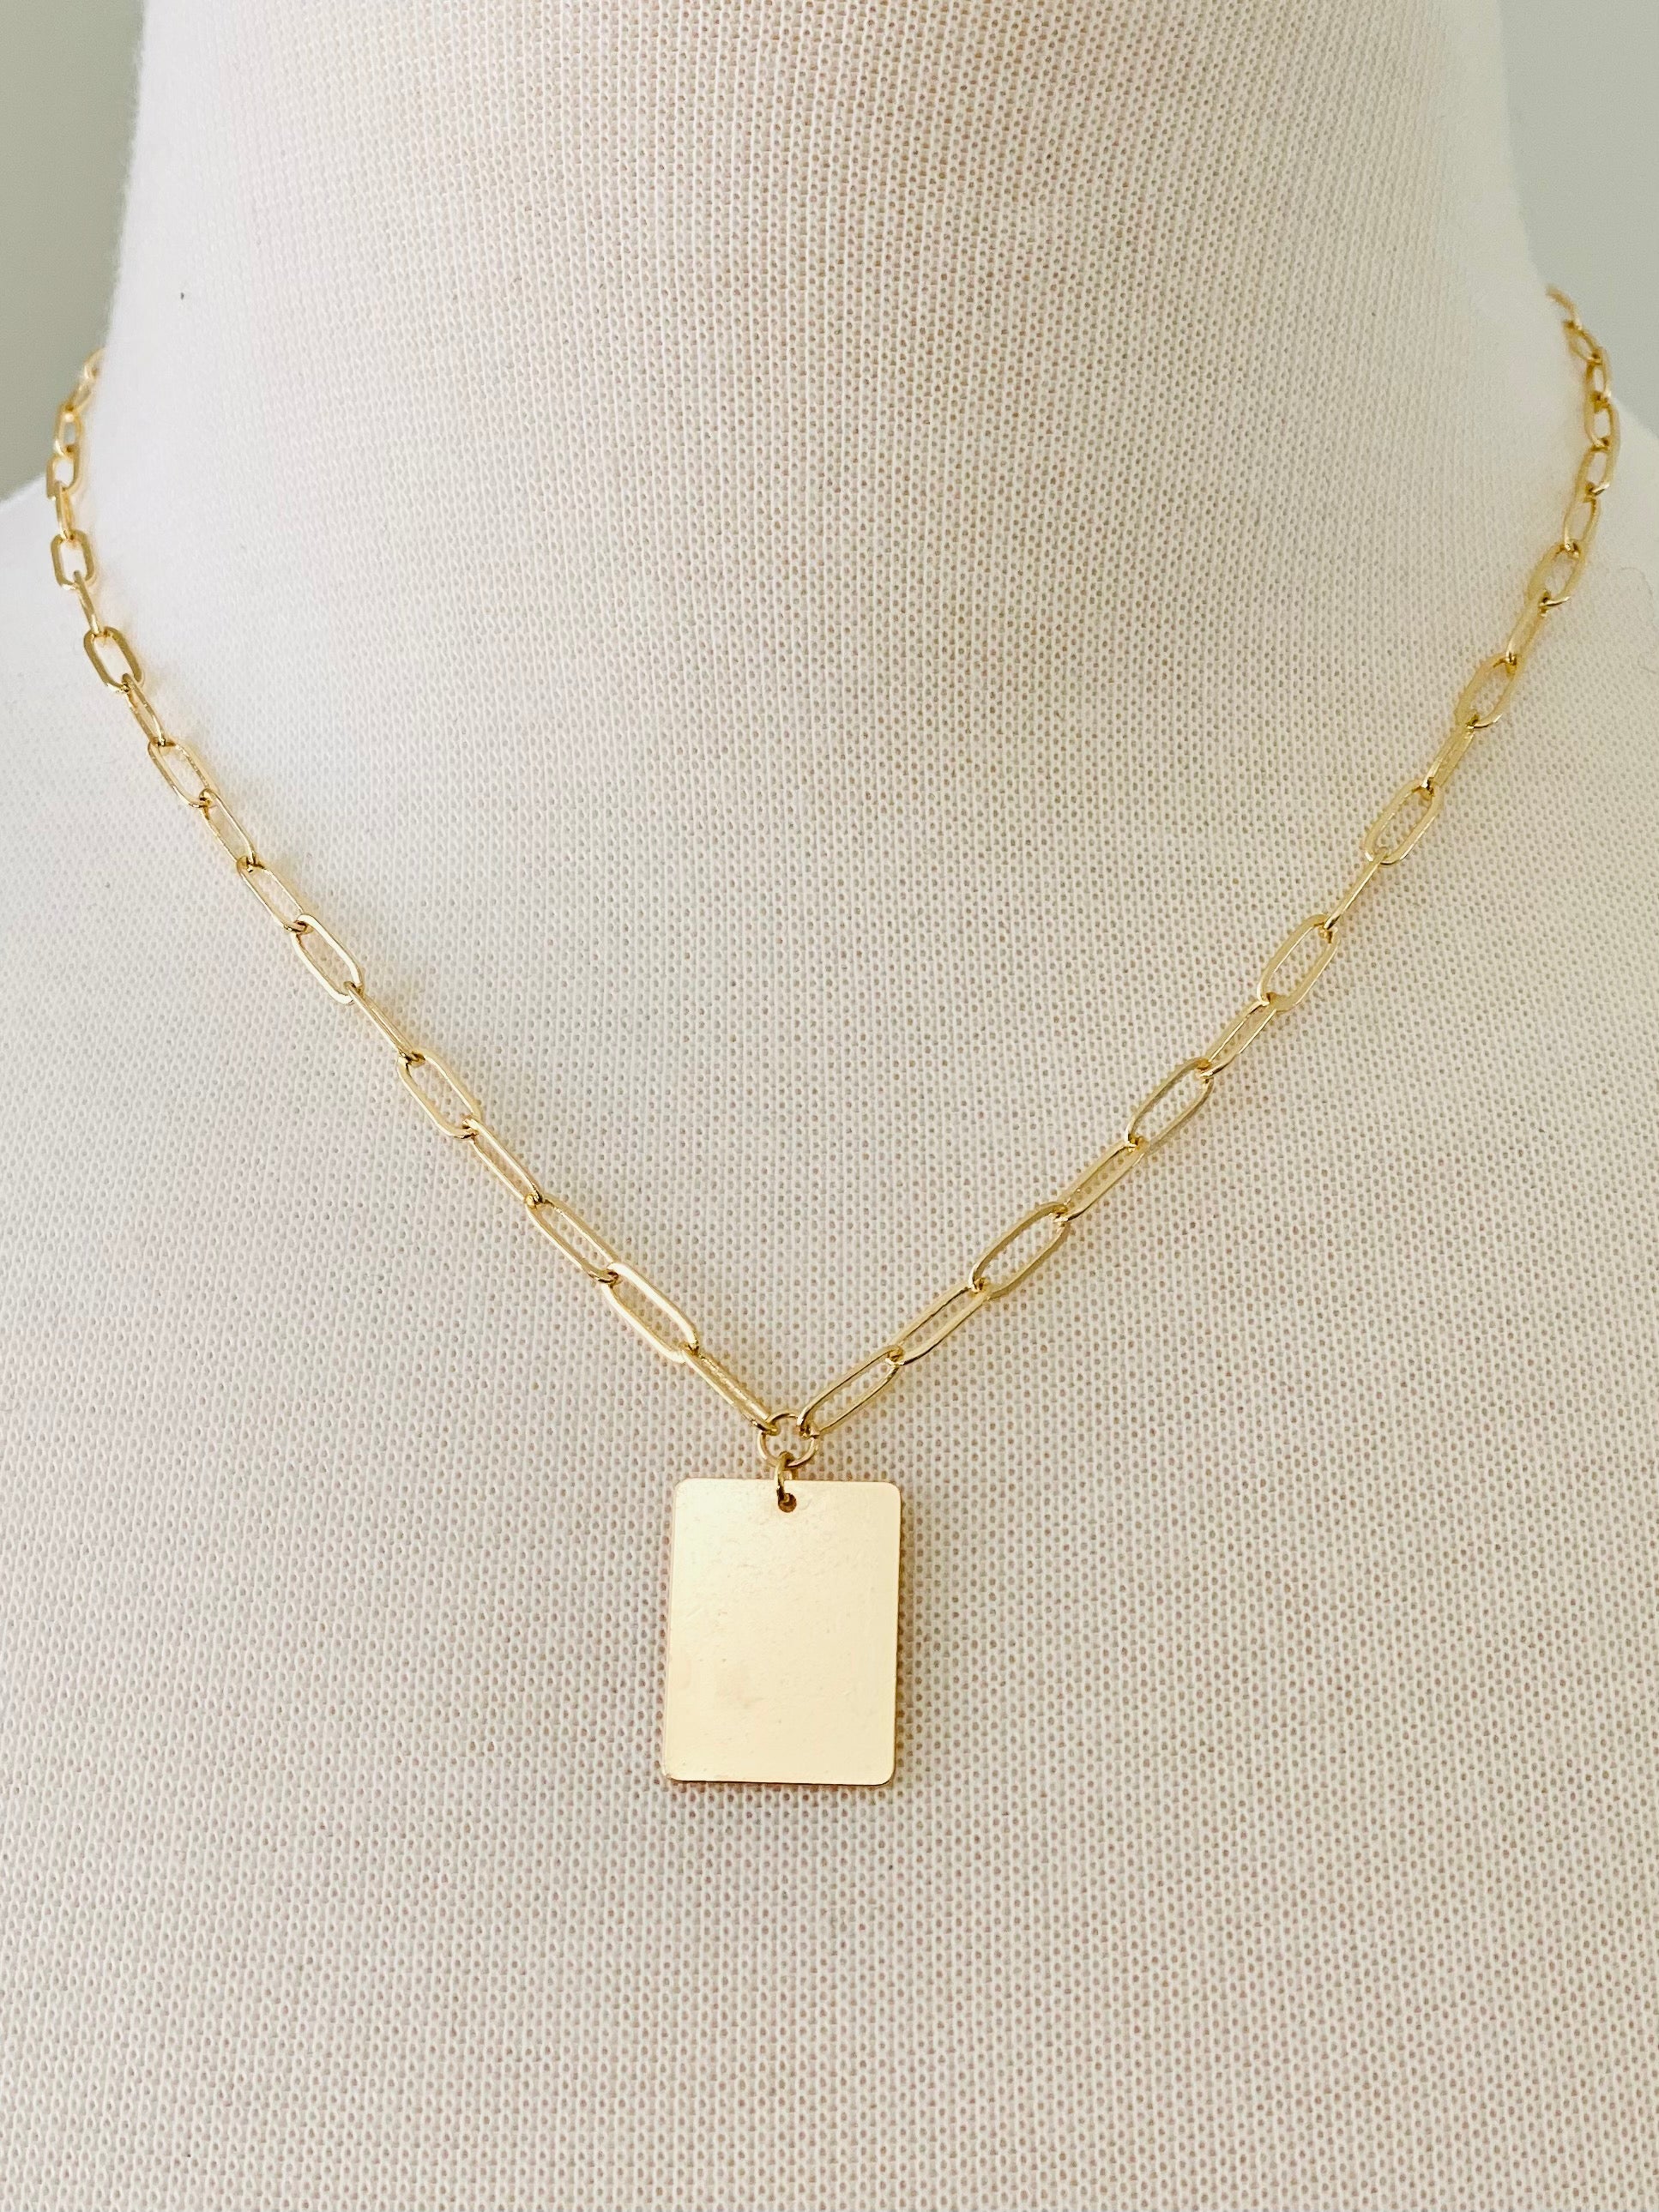 NL55 RECTANGLE CHARM NECKLACE